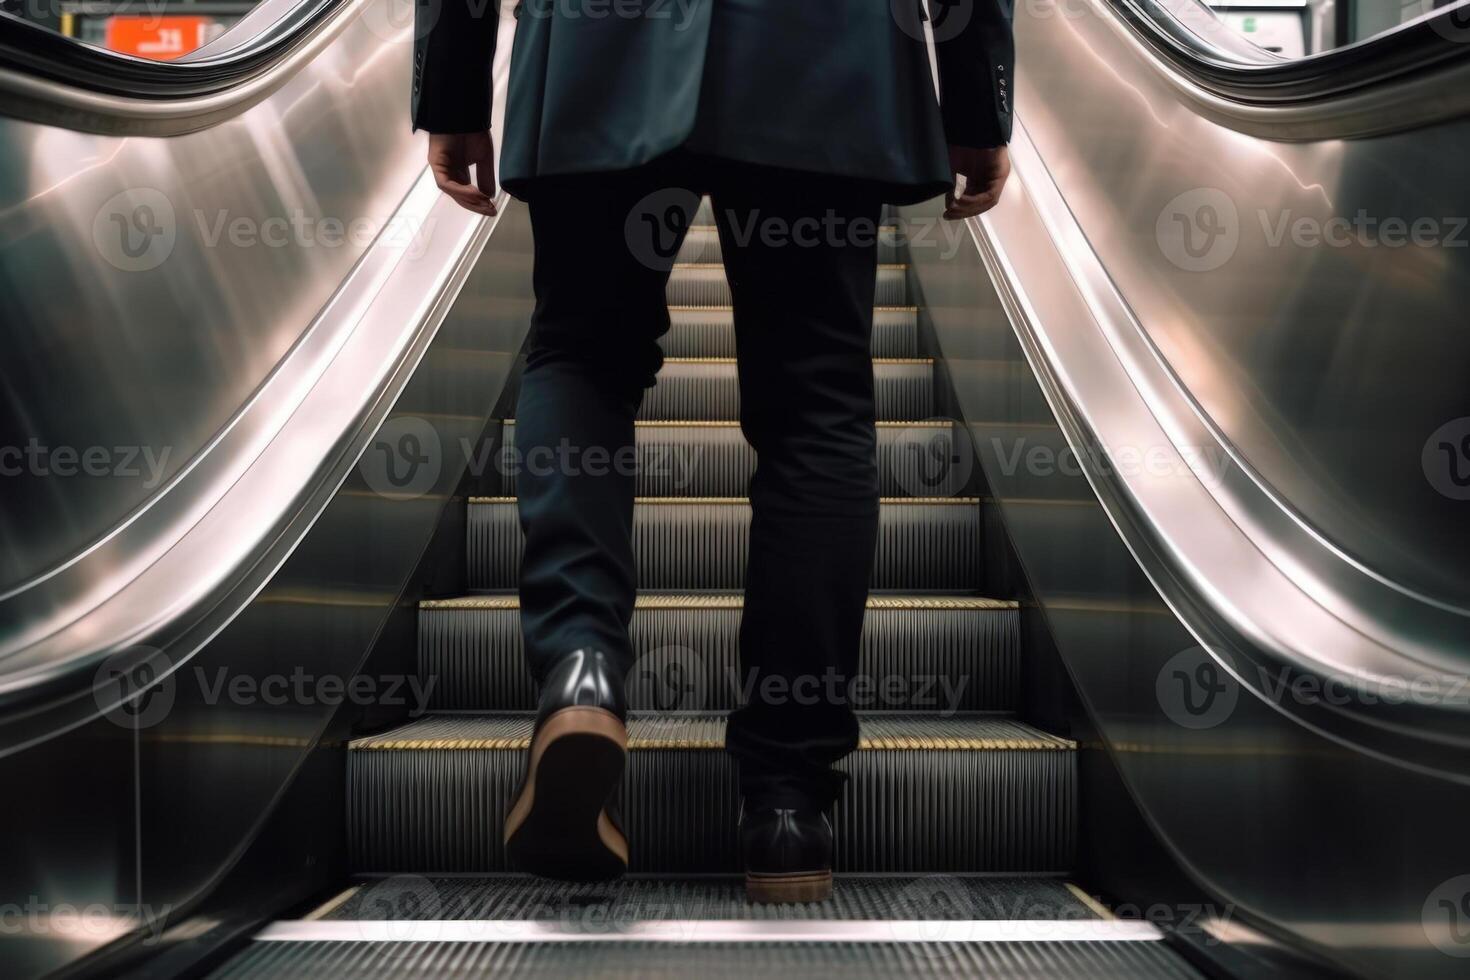 businessman legs in a suit and shoes climbing steir the escalator shopping center photo